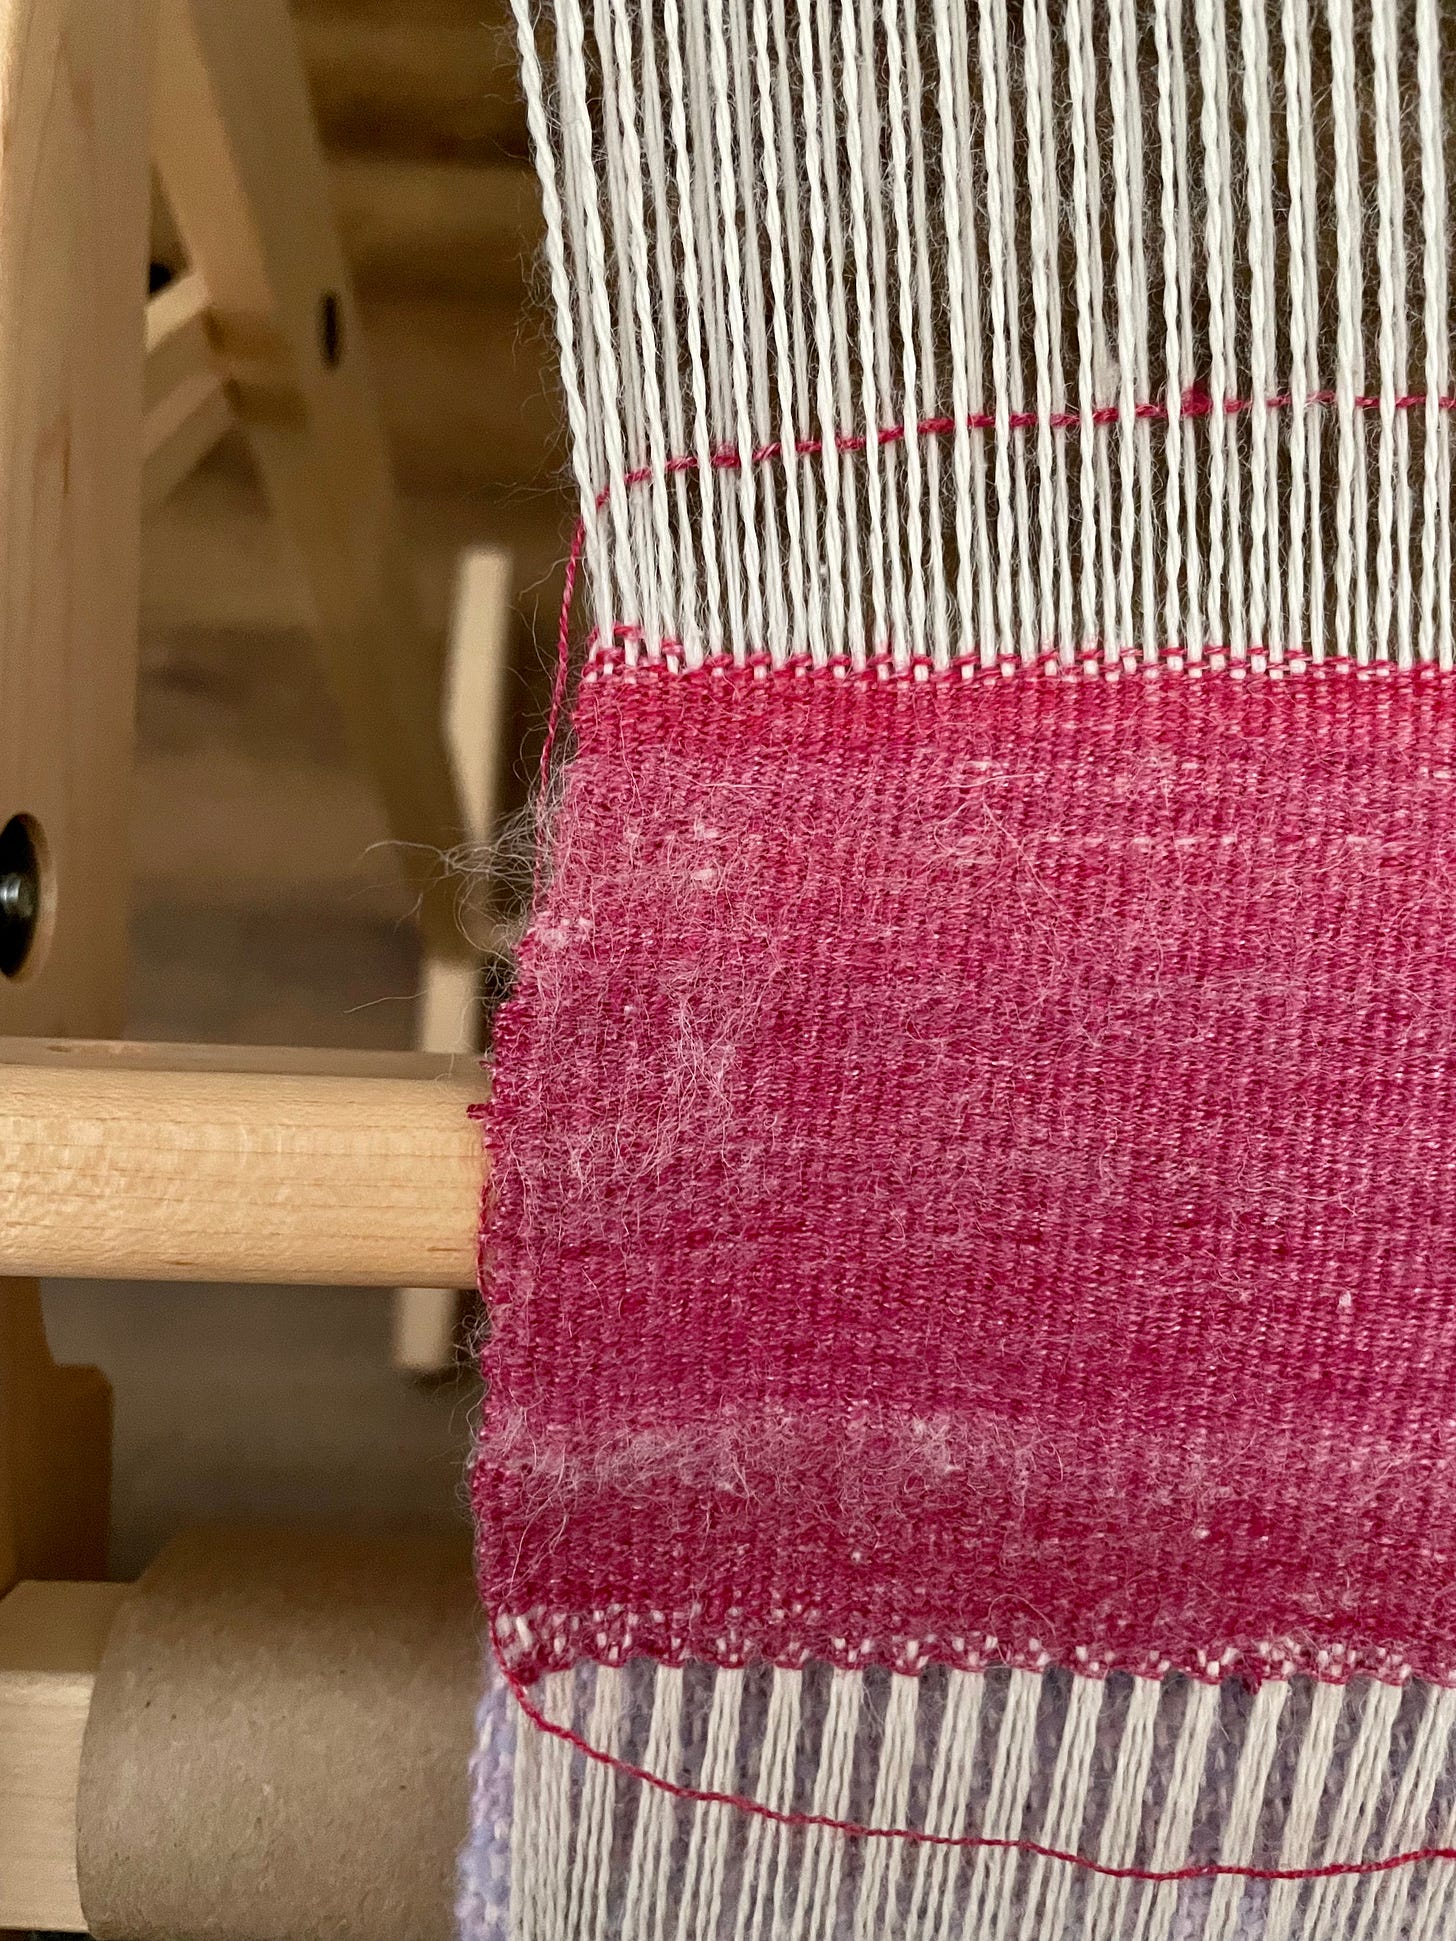 White warp threads with red weft. There's a noticeable draw-in.